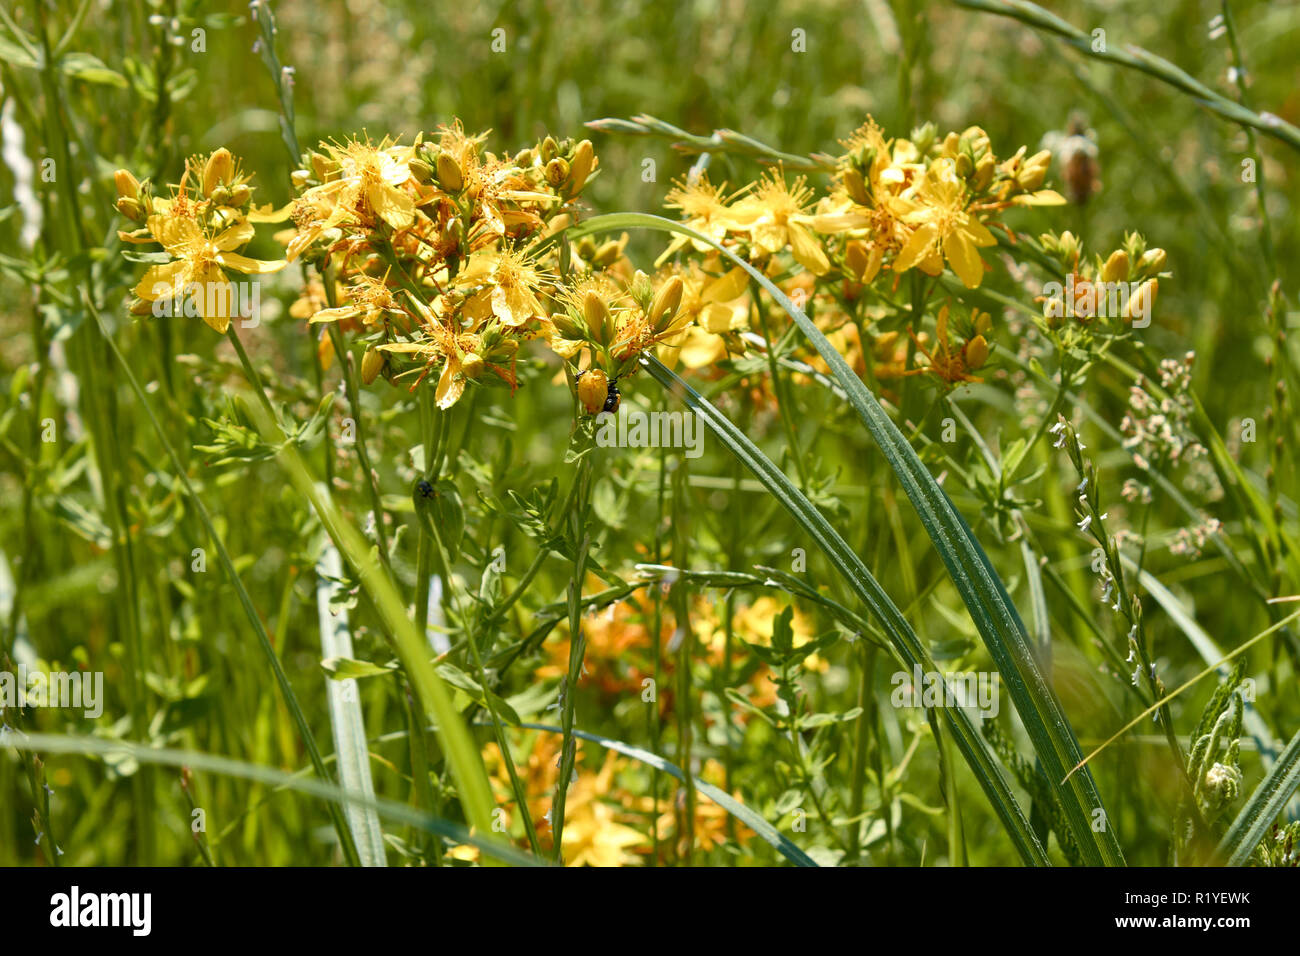 Flowering plant of Hypericum perforatum or St John's wort on the  meadows close-up in sunlight Stock Photo